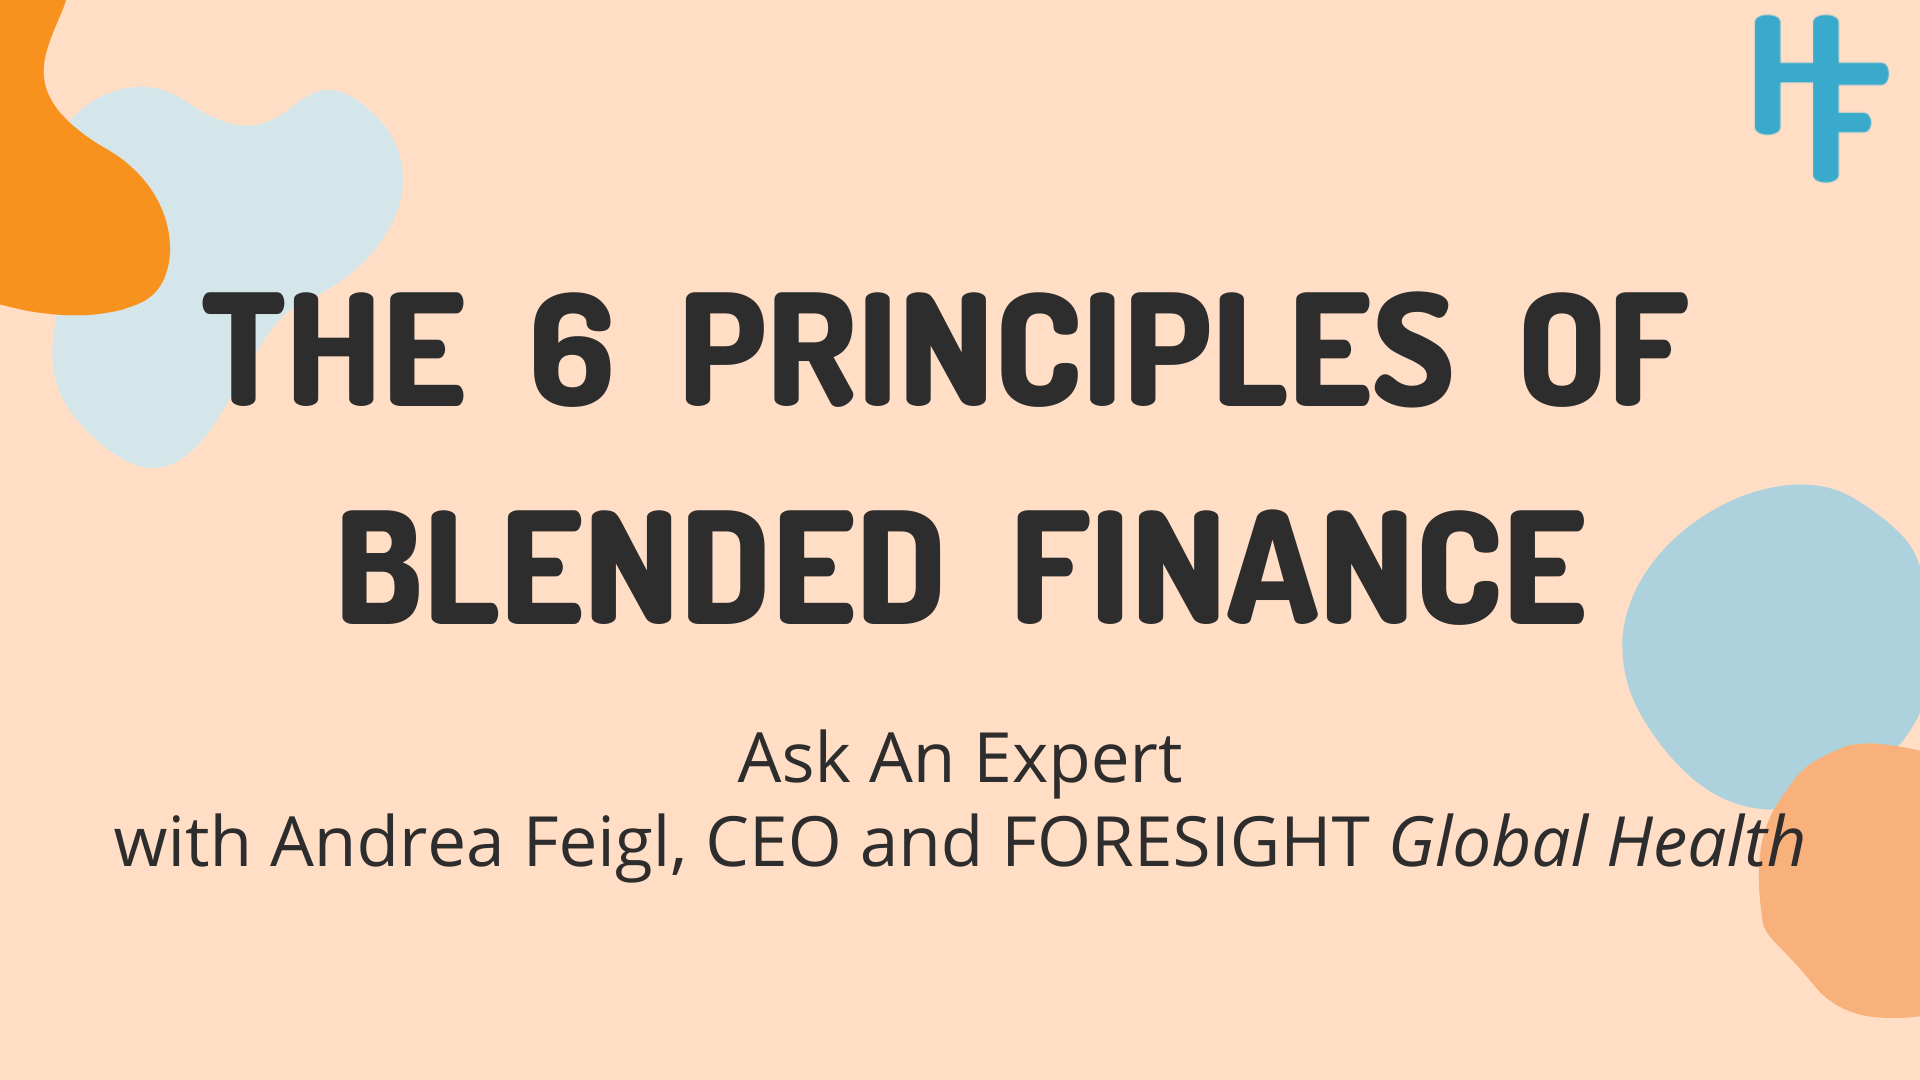 The 6 Principles of Blended Finance: Ask An Expert with Andrea Feigl, CEO and FORESIGHT Global Health. Graphic with orange background and blue and orange blobs, with text on top.